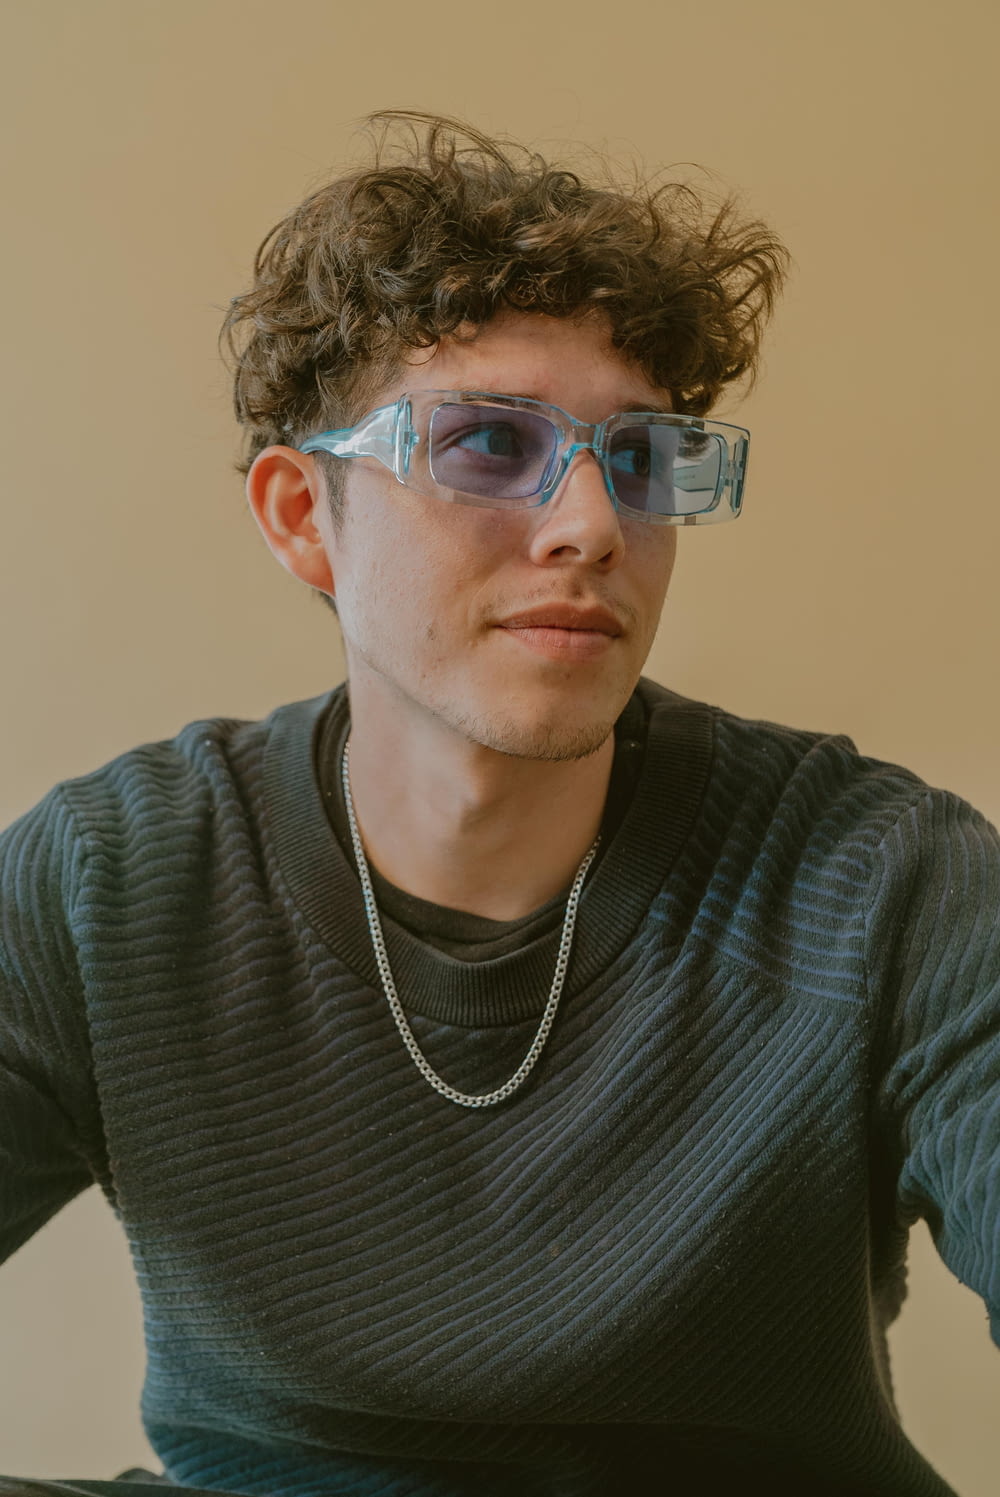 a young man wearing glasses and a necklace